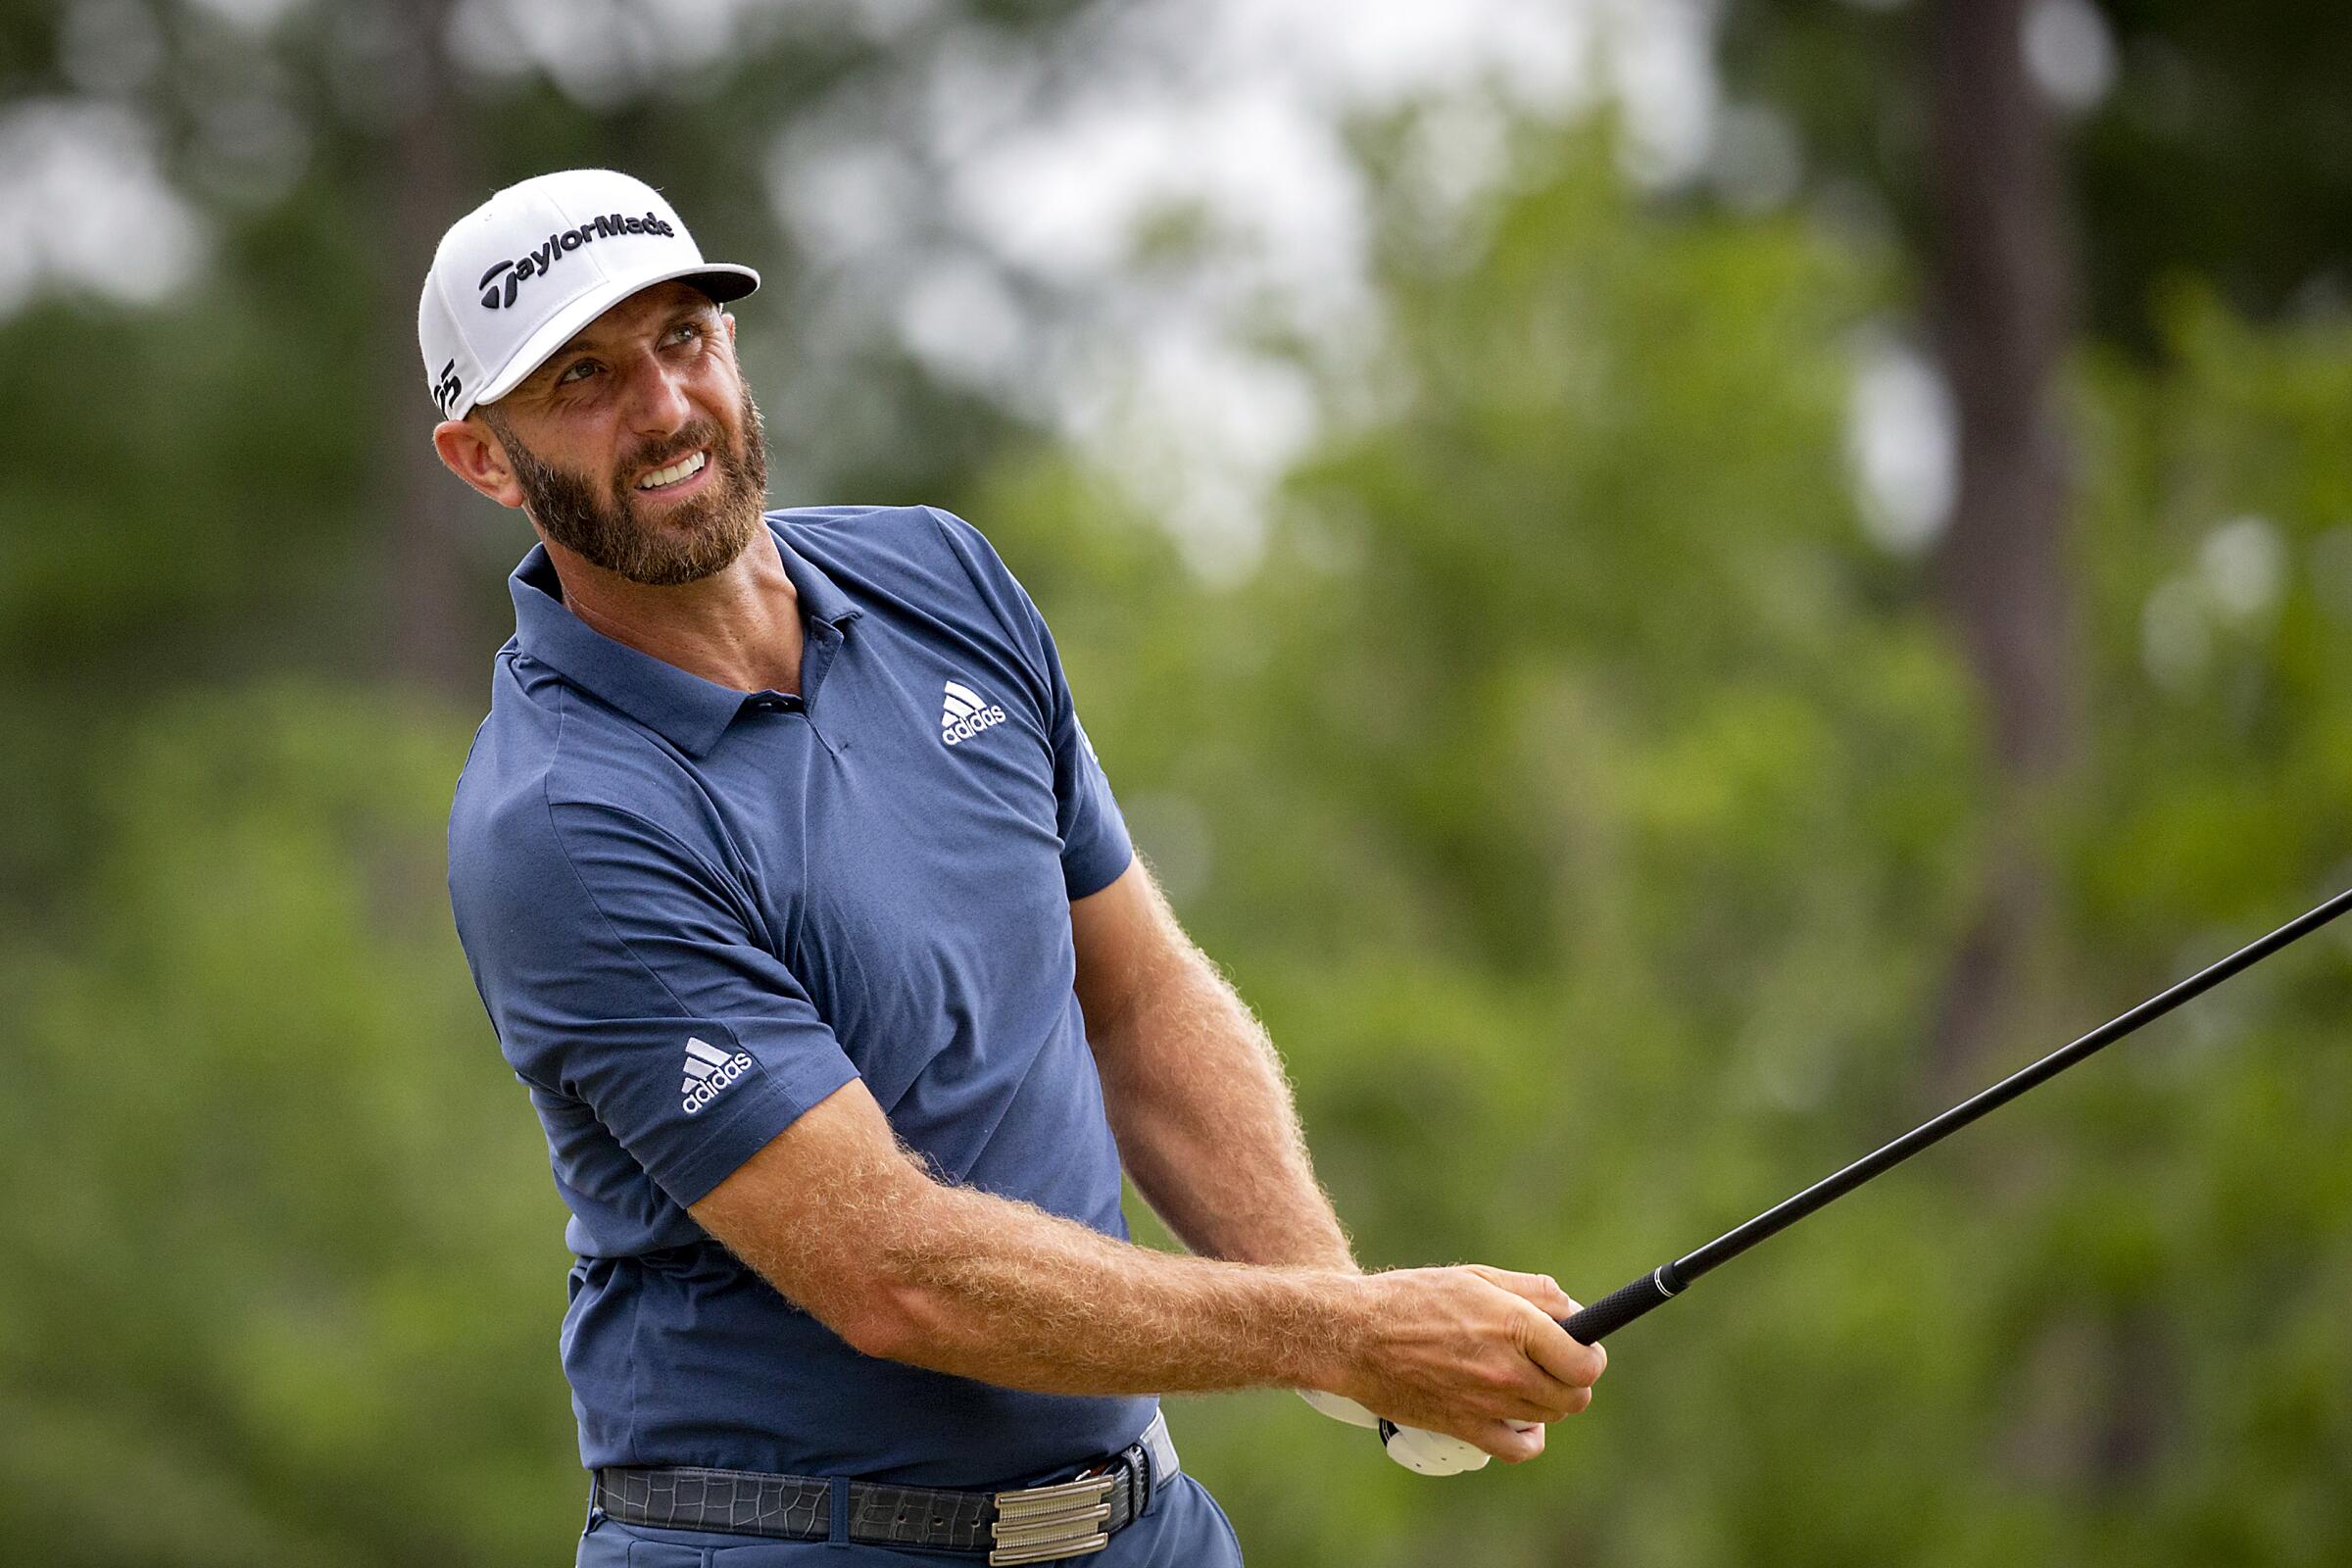 Dustin Johnson watches his drive while holding his gold club.